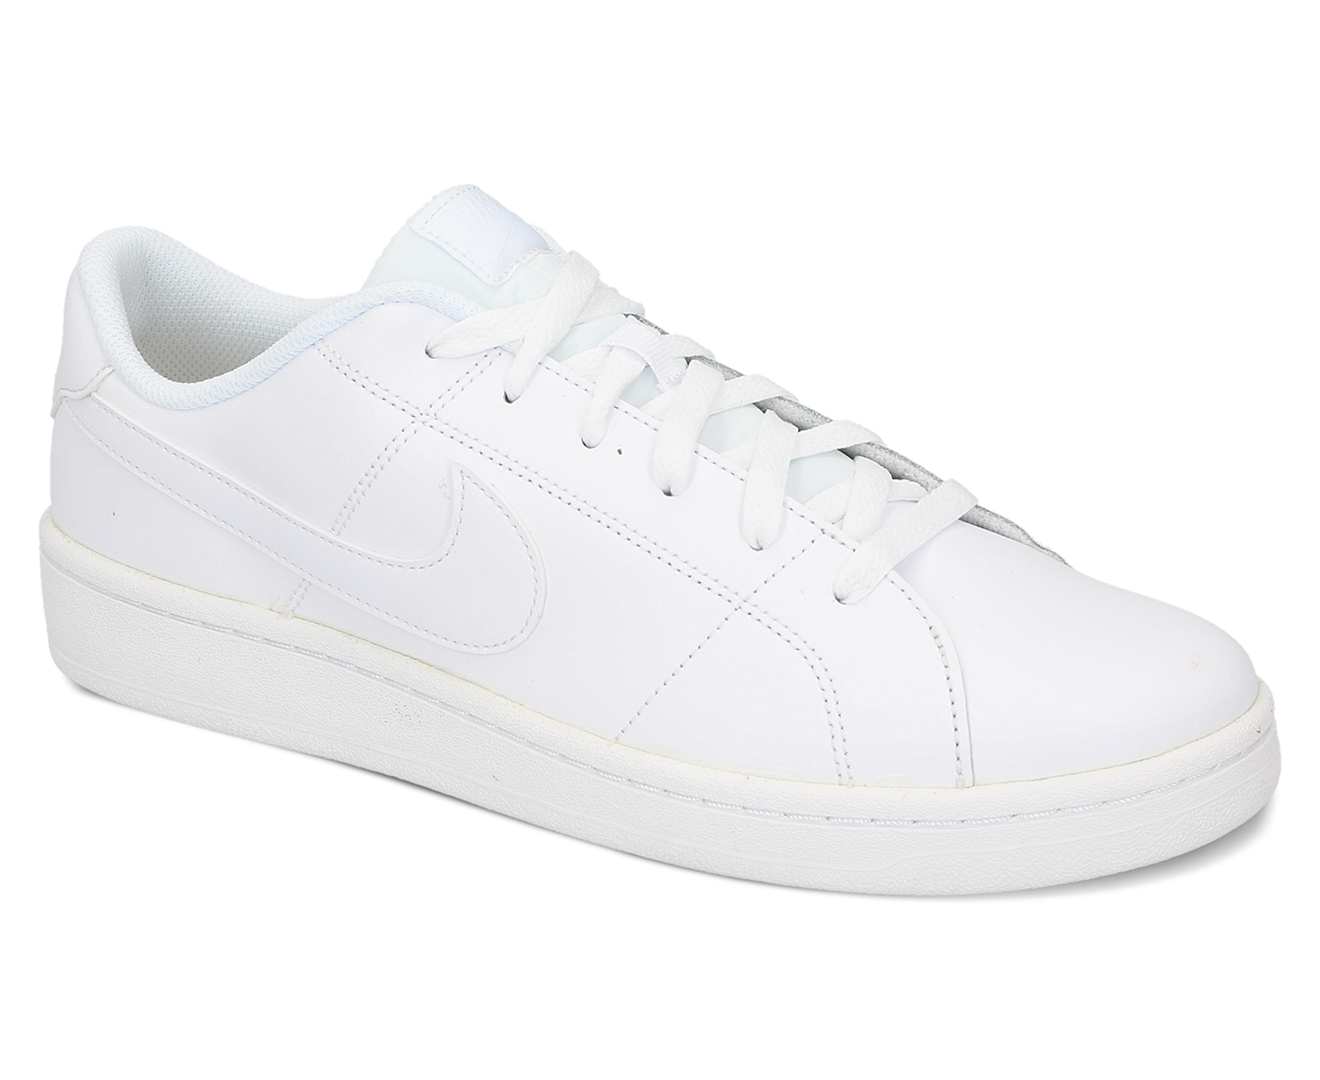 Nike Men s Court Royale 2 Sneakers White Catch co nz